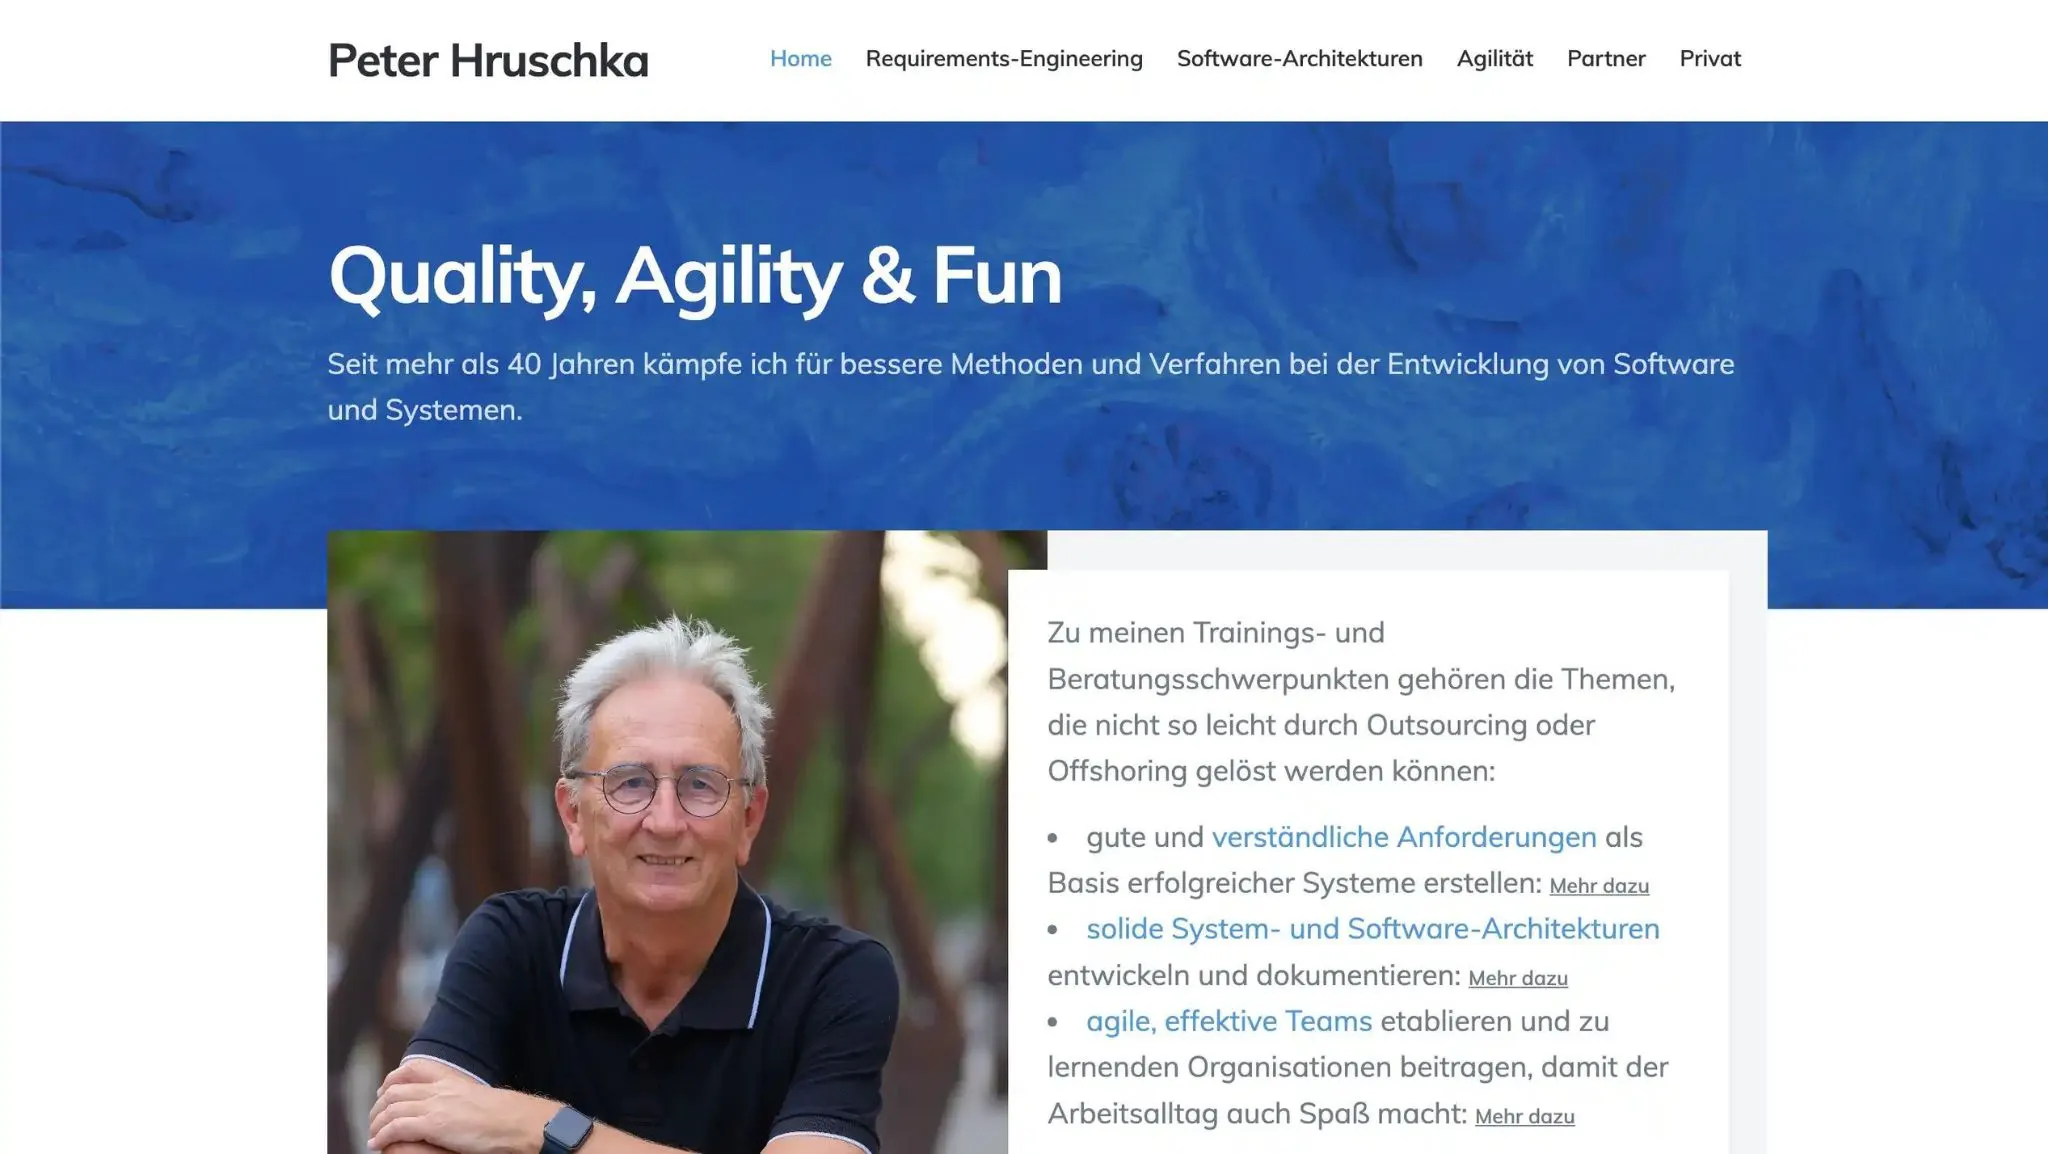 Website created for Peter Hruschka, agile software development and requirements engineering